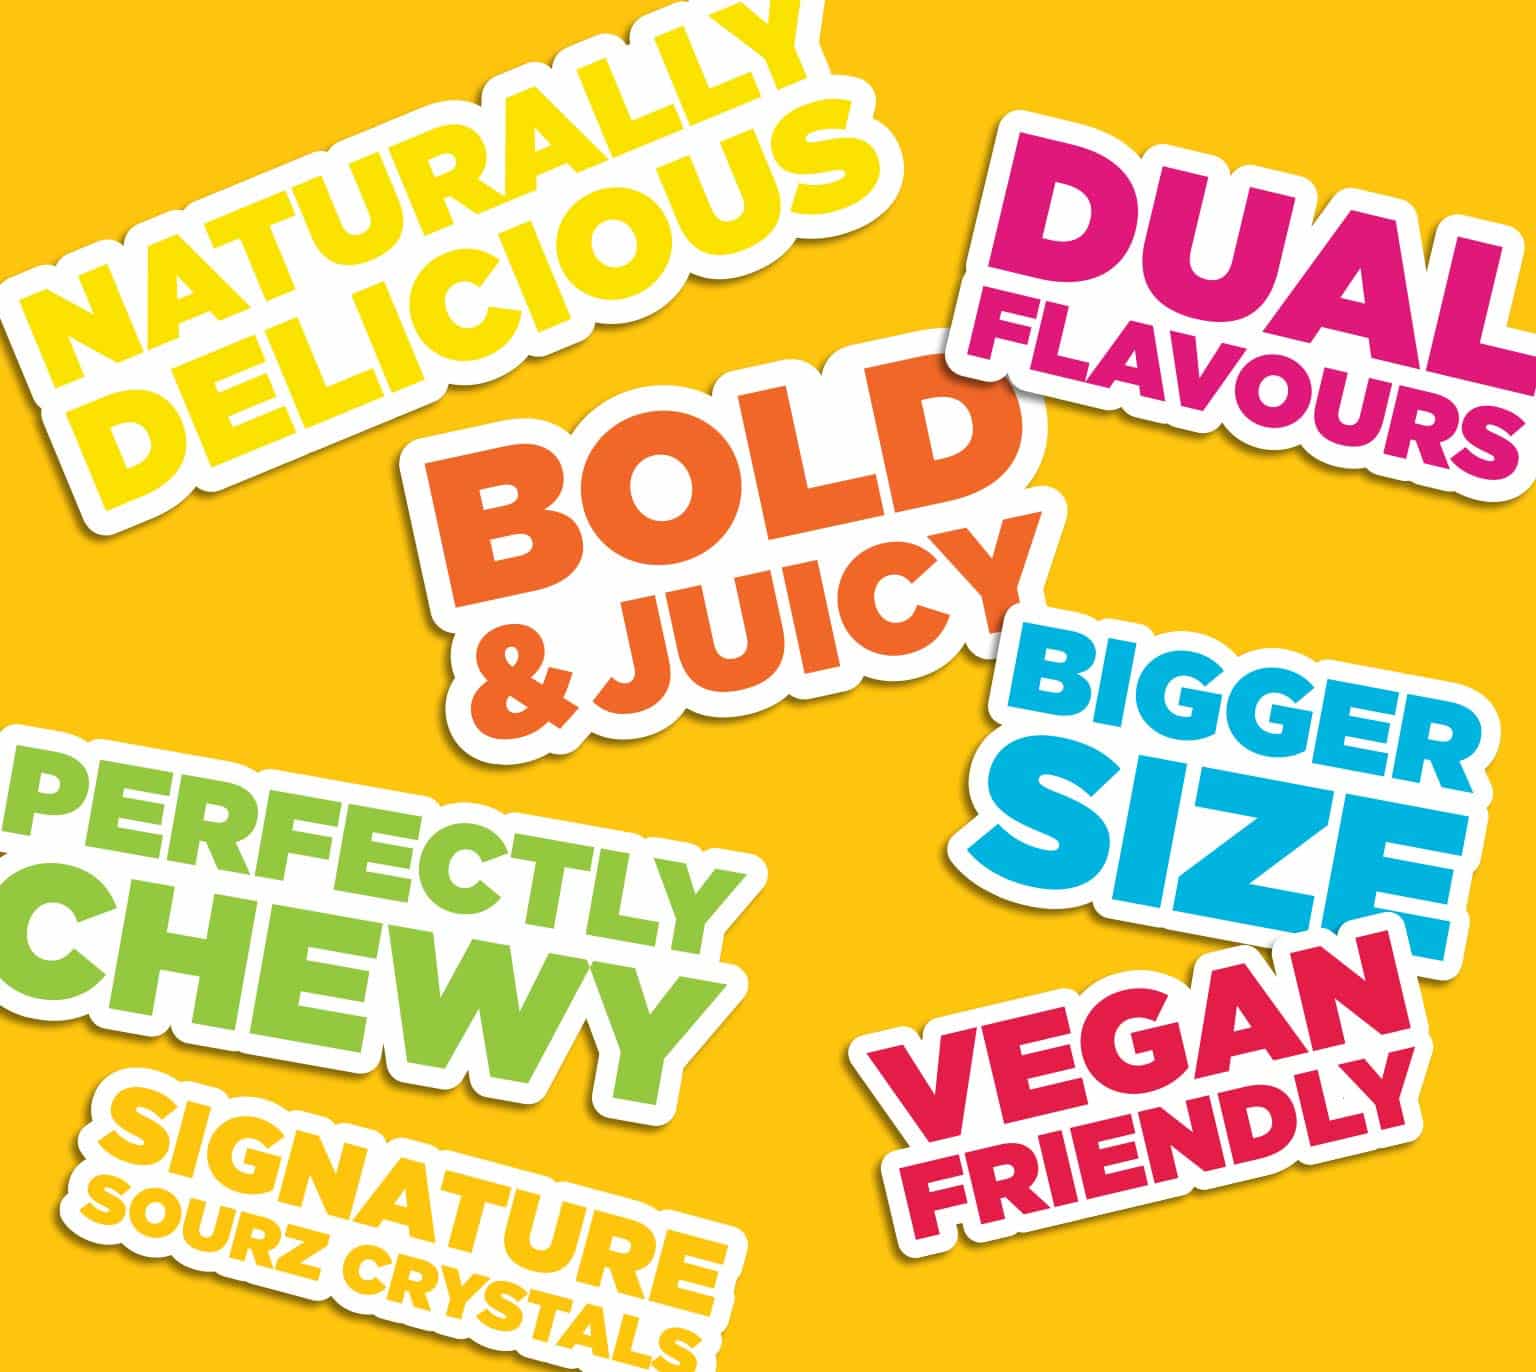 Bold & Juicy, Dual Flavours, Perfectly Chewy